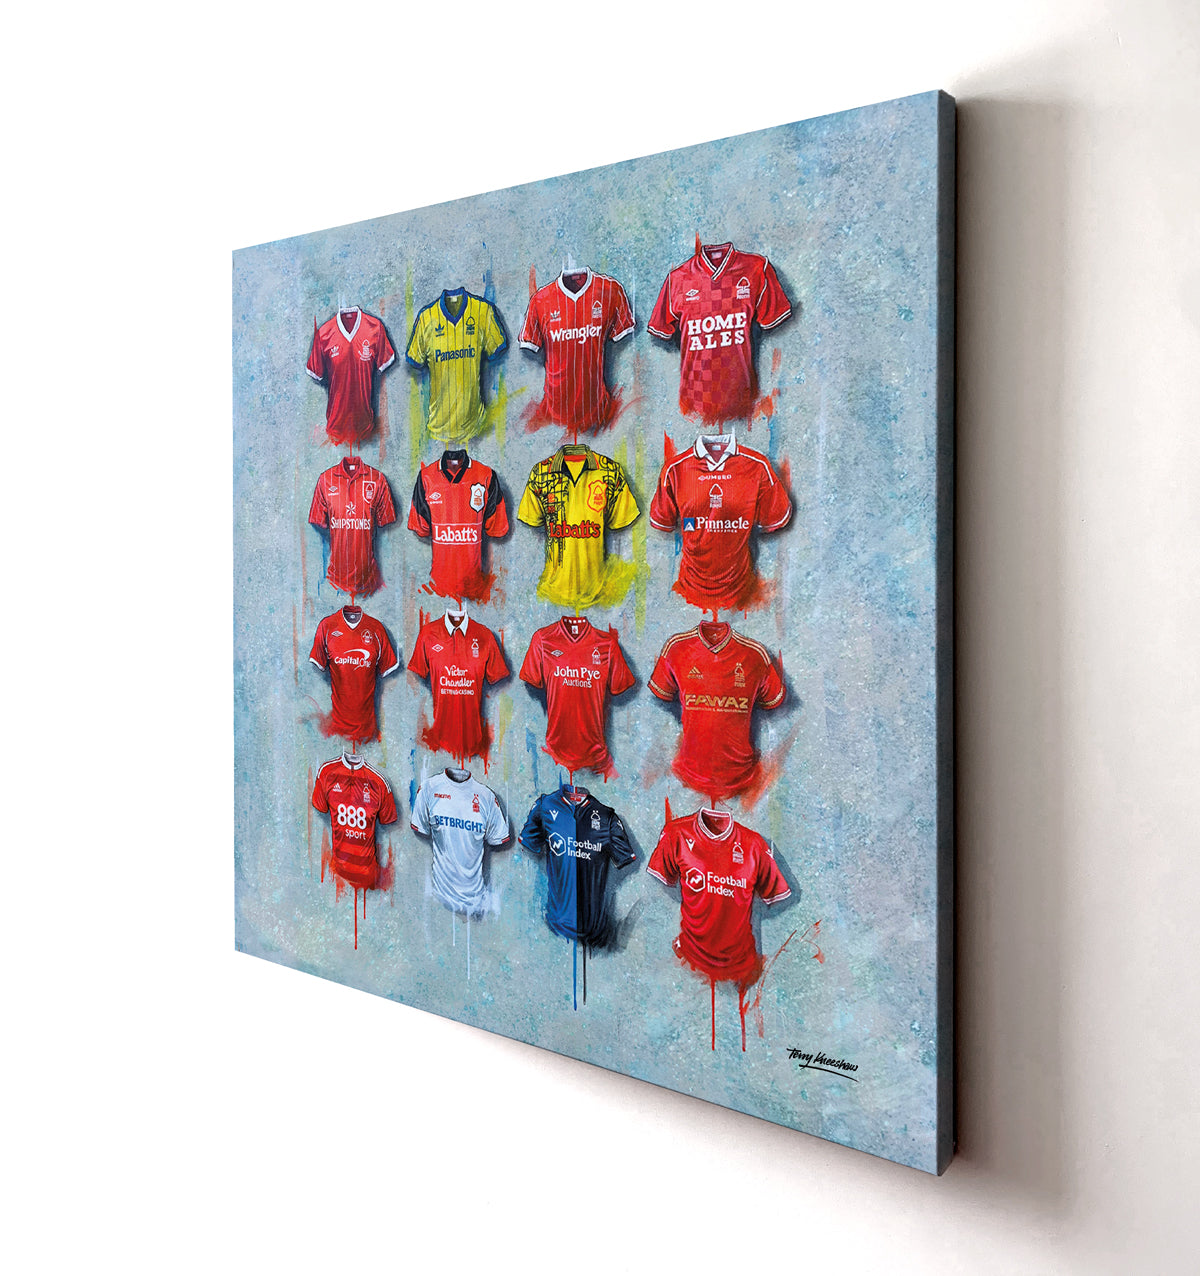 These Nottingham Forest canvases from Terry Kneeshaw are available in various sizes (20x20, 30x30 or 40x40) and framed or unframed in a black floating frame. The artwork features stunning images of the team and its players, perfect for any fan or collector. Add a touch of the Reds to your home or office decor with these high-quality canvases.